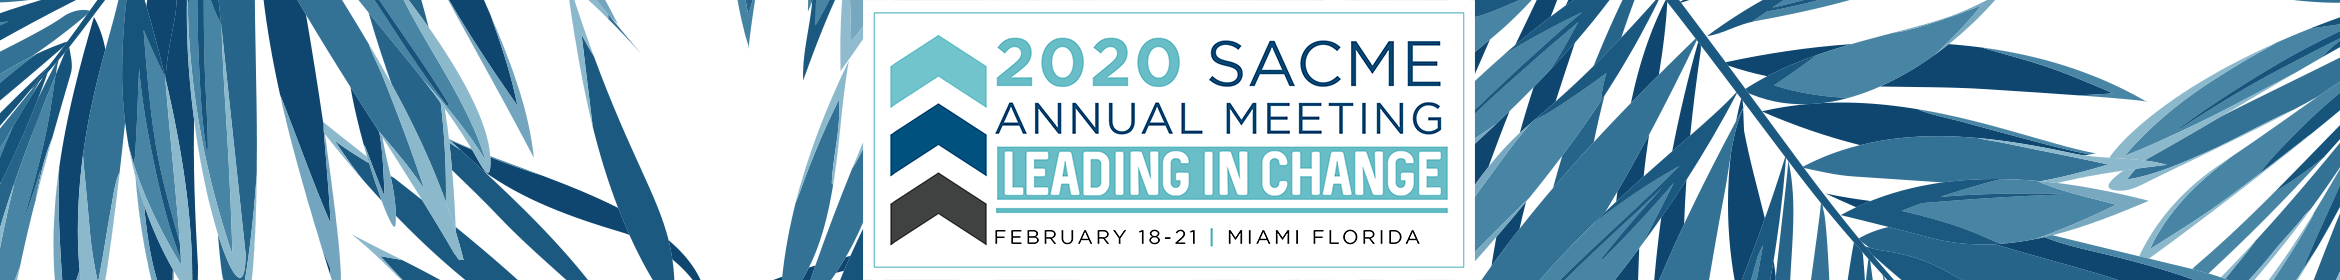 2020 SACME Annual Conference Main banner